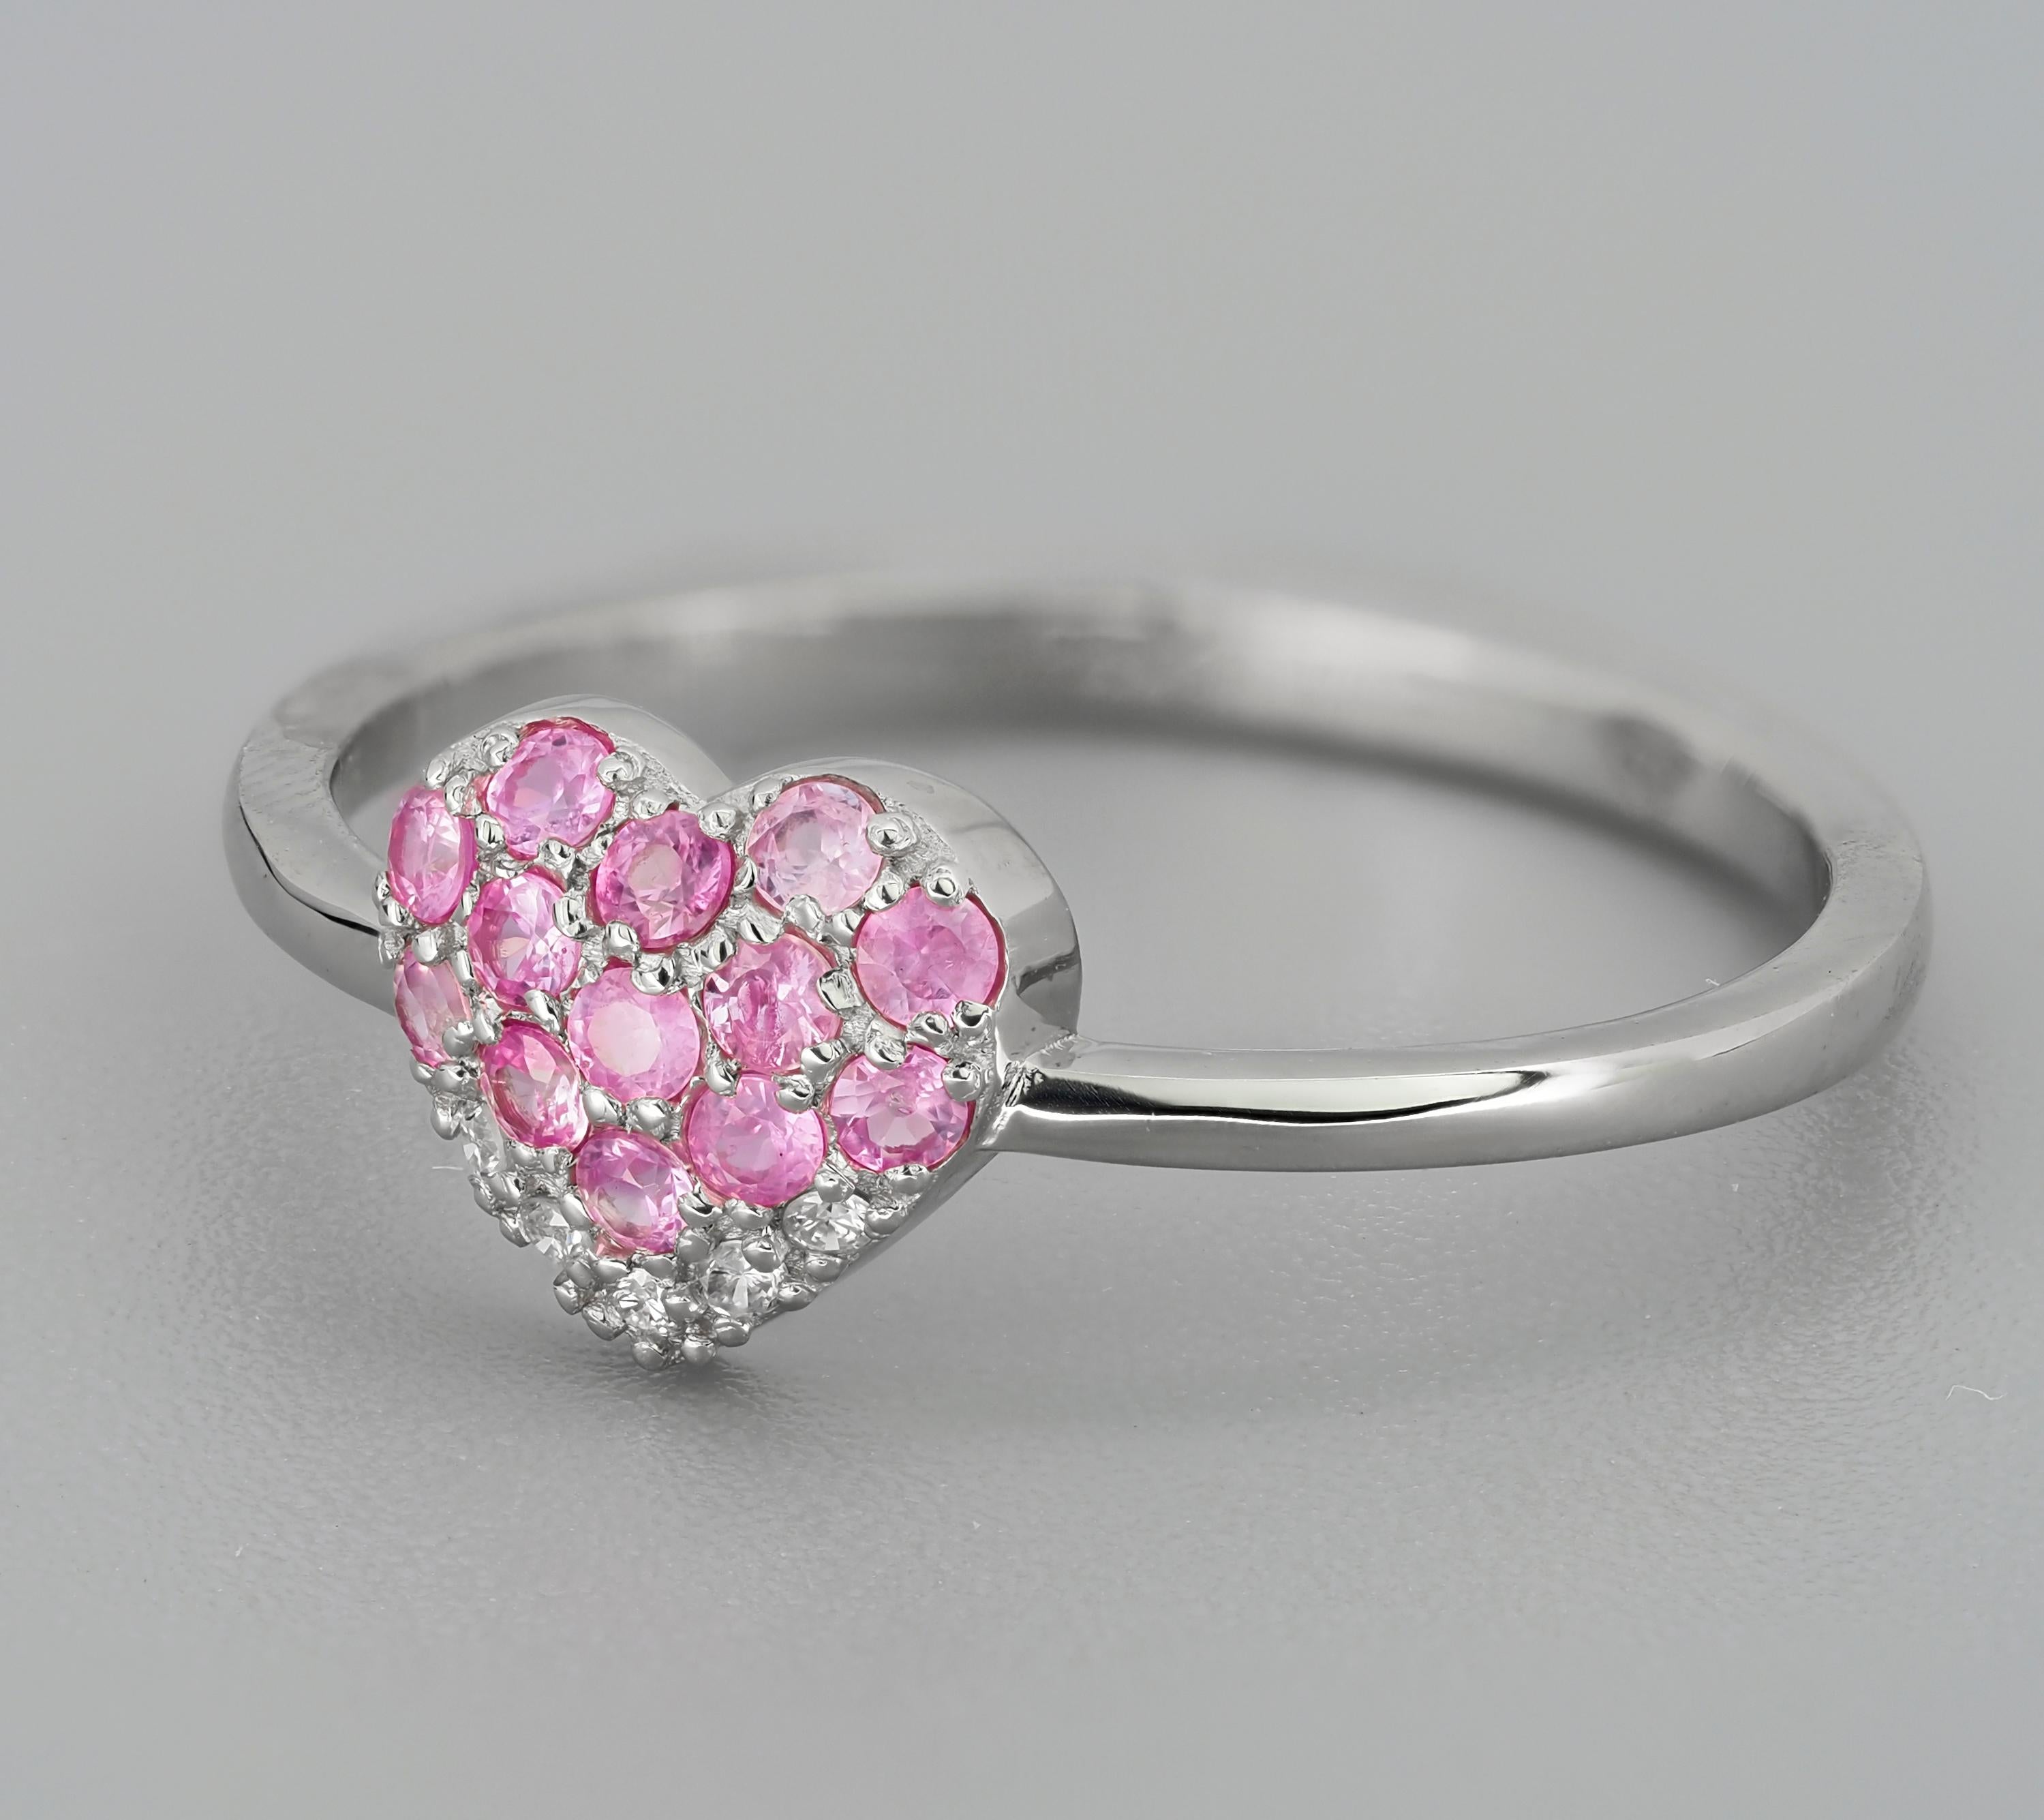 For Sale:  Heart Shaped Gold Ring with Pink Sapphires 9